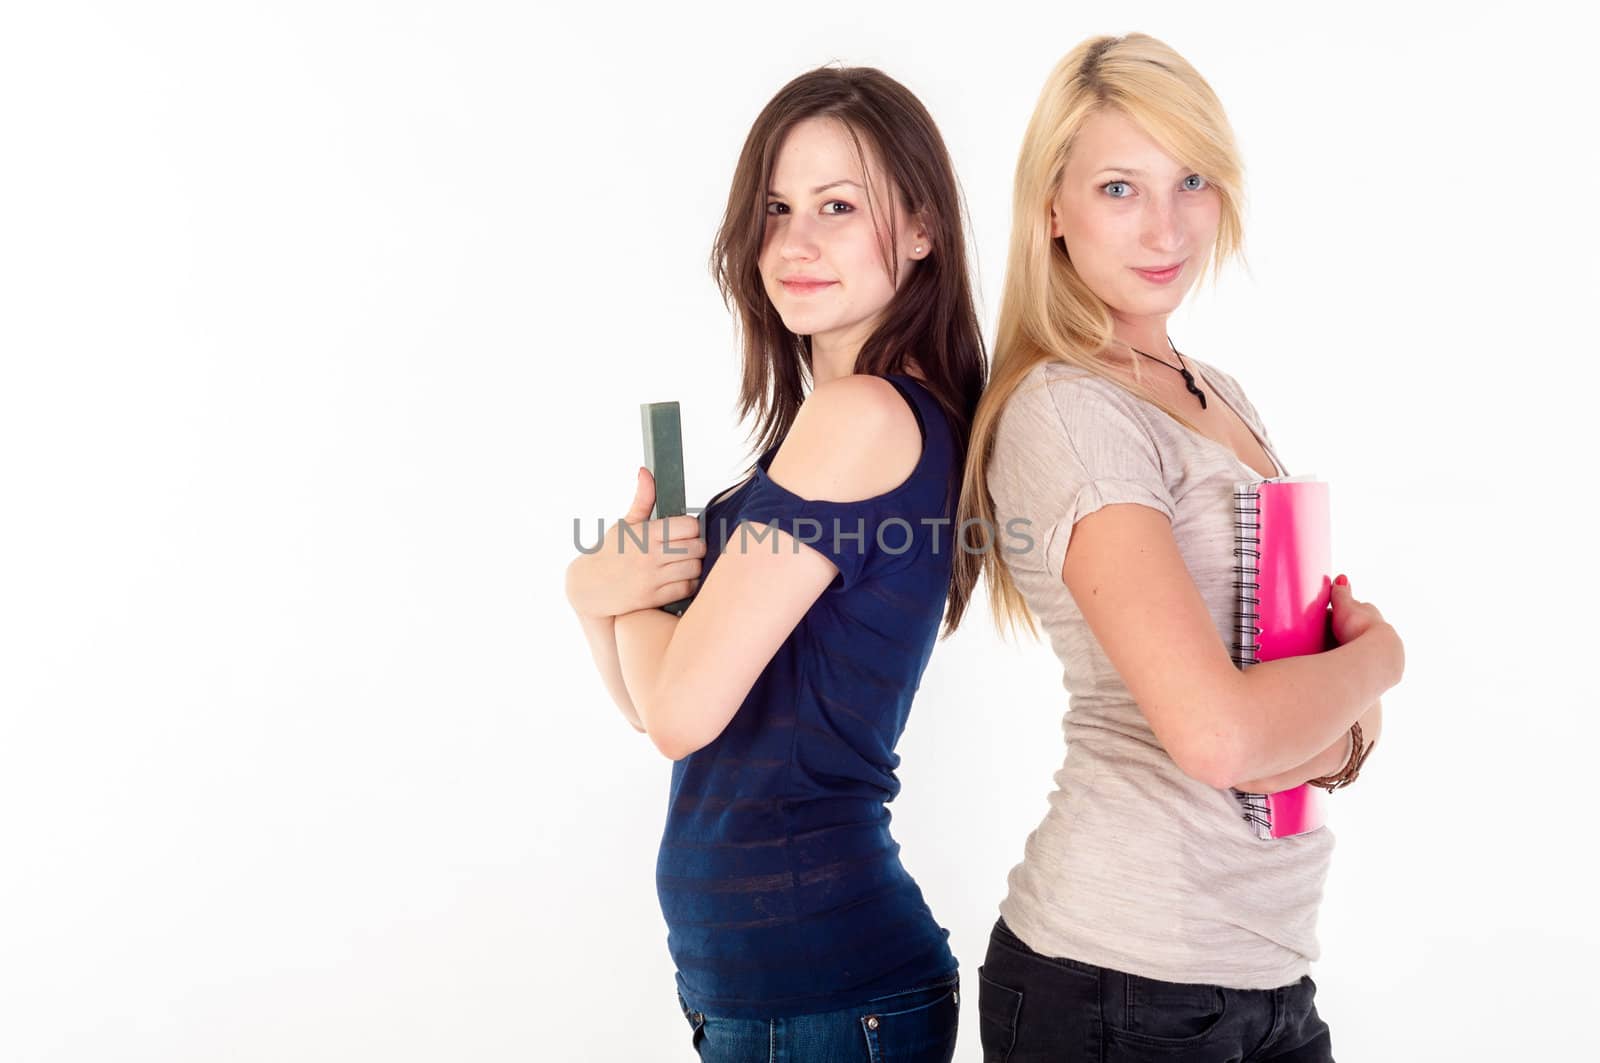 Two beautiful student girls against white background